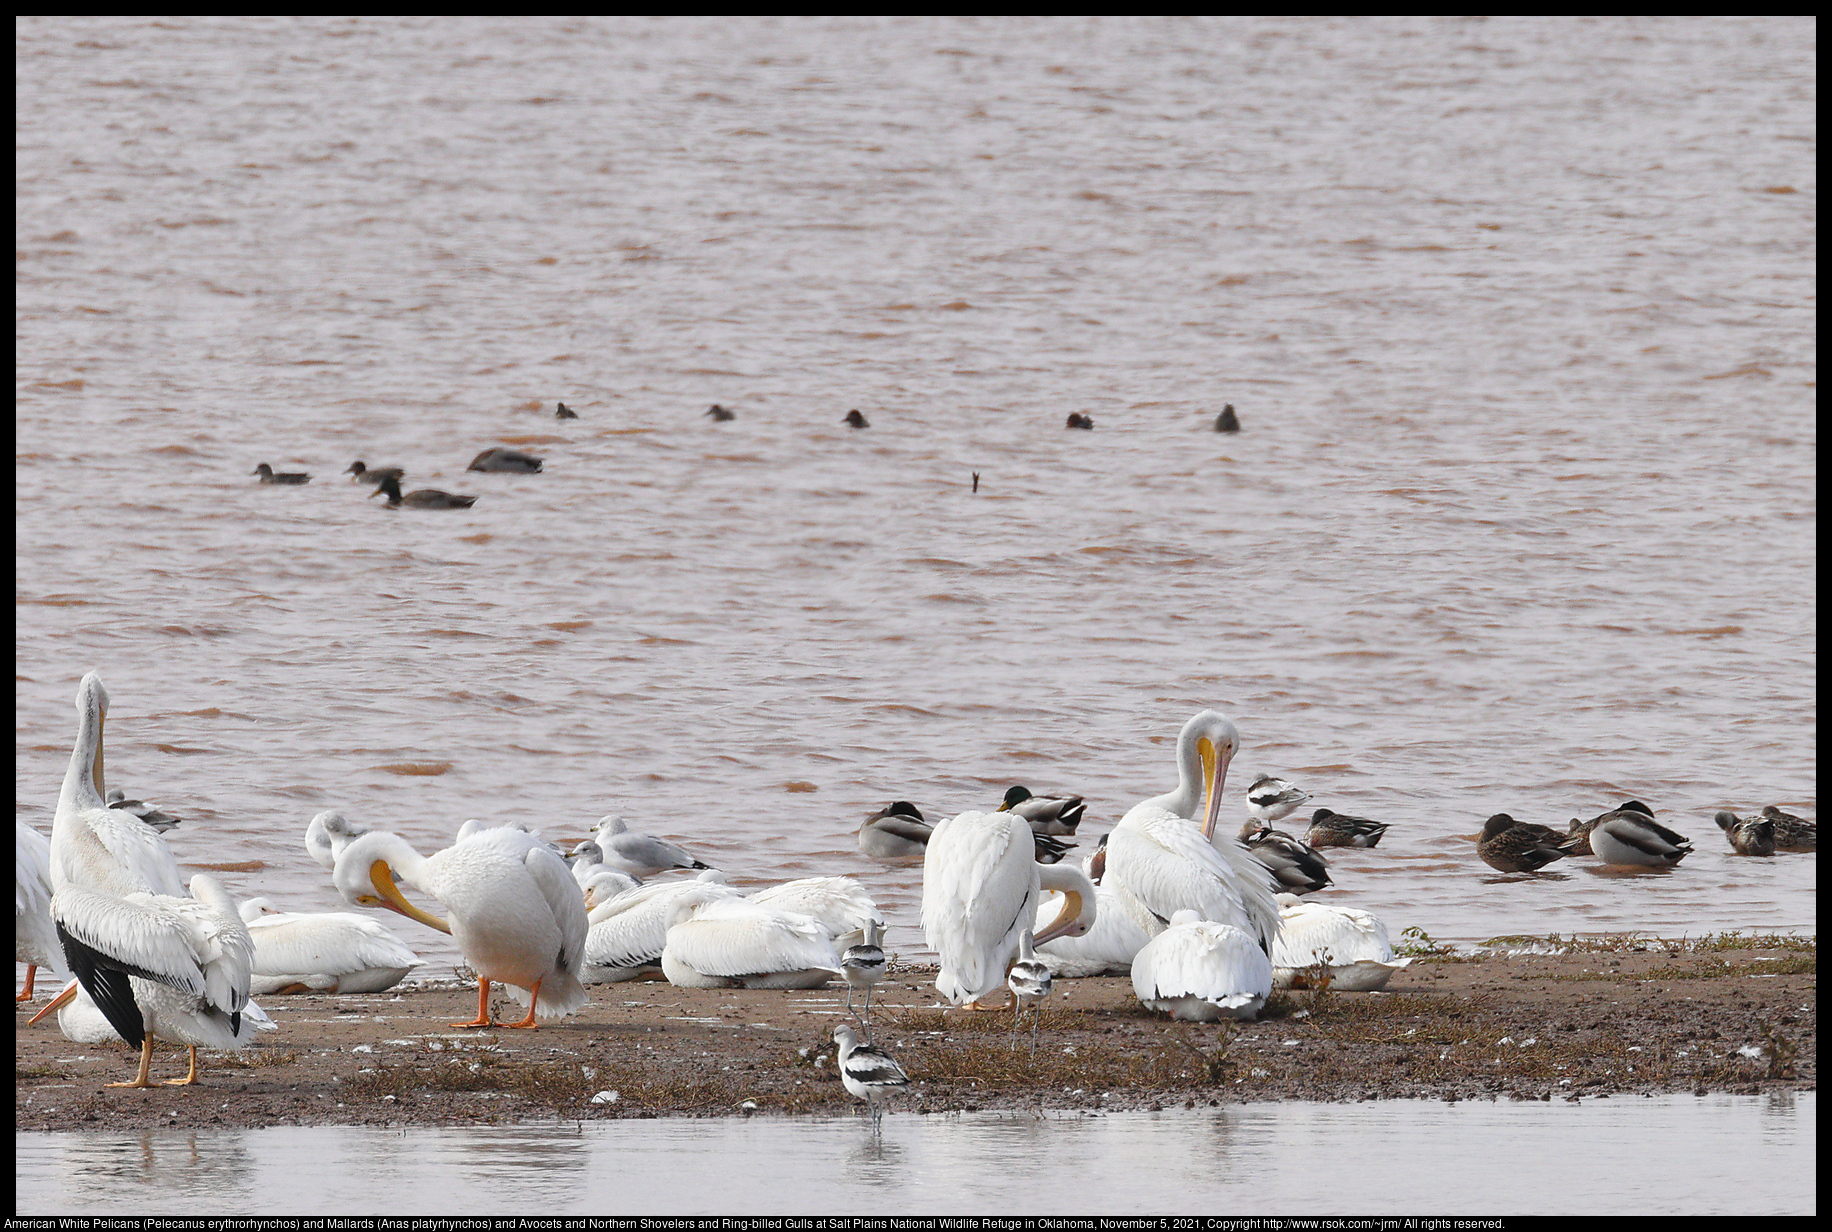 American White Pelicans (Pelecanus erythrorhynchos) and Mallards (Anas platyrhynchos) and Avocets and Northern Shovelers and Ring-billed Gulls at Salt Plains National Wildlife Refuge in Oklahoma, November 5, 2021